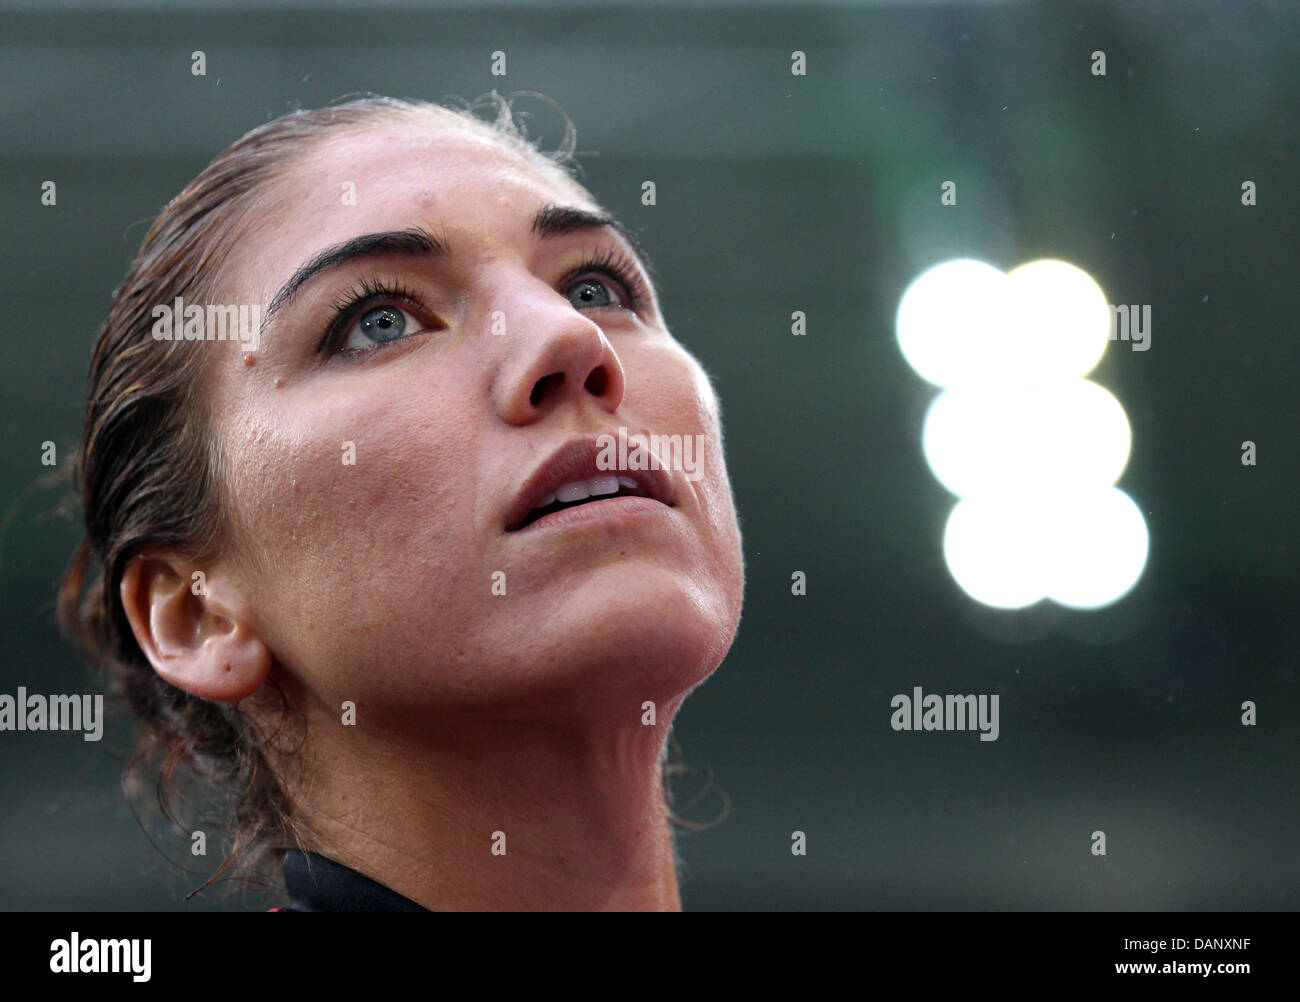 Goalkeeper Hope Solo of USA  after the semi-final soccer match of the FIFA Women's World Cup between France and the USA at the Borussia-Park stadium in Moenchengladbach, Germany, 13 July 2011. Photo: Friso Gentsch dpa/lnw  +++(c) dpa - Bildfunk+++ Stock Photo